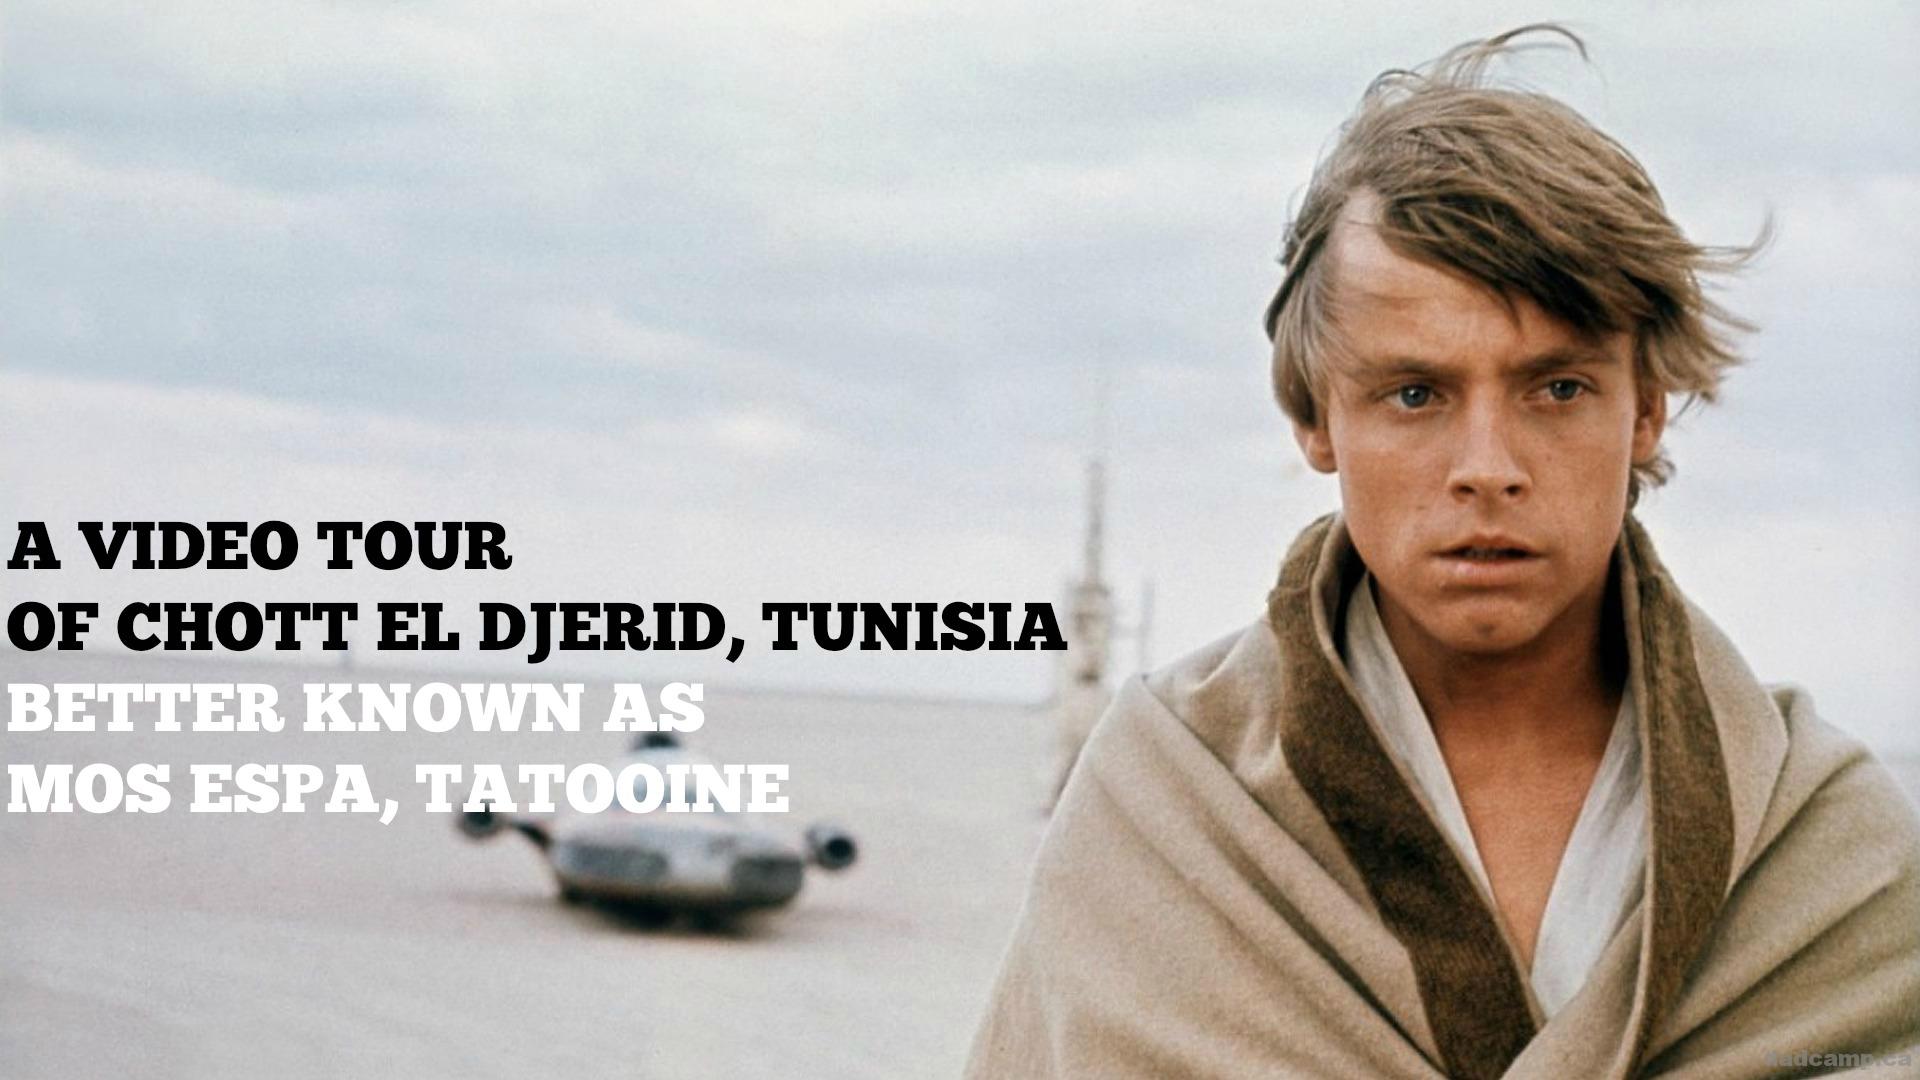 A Video Tour Of Abandoned Star Wars Sets In Tunisia